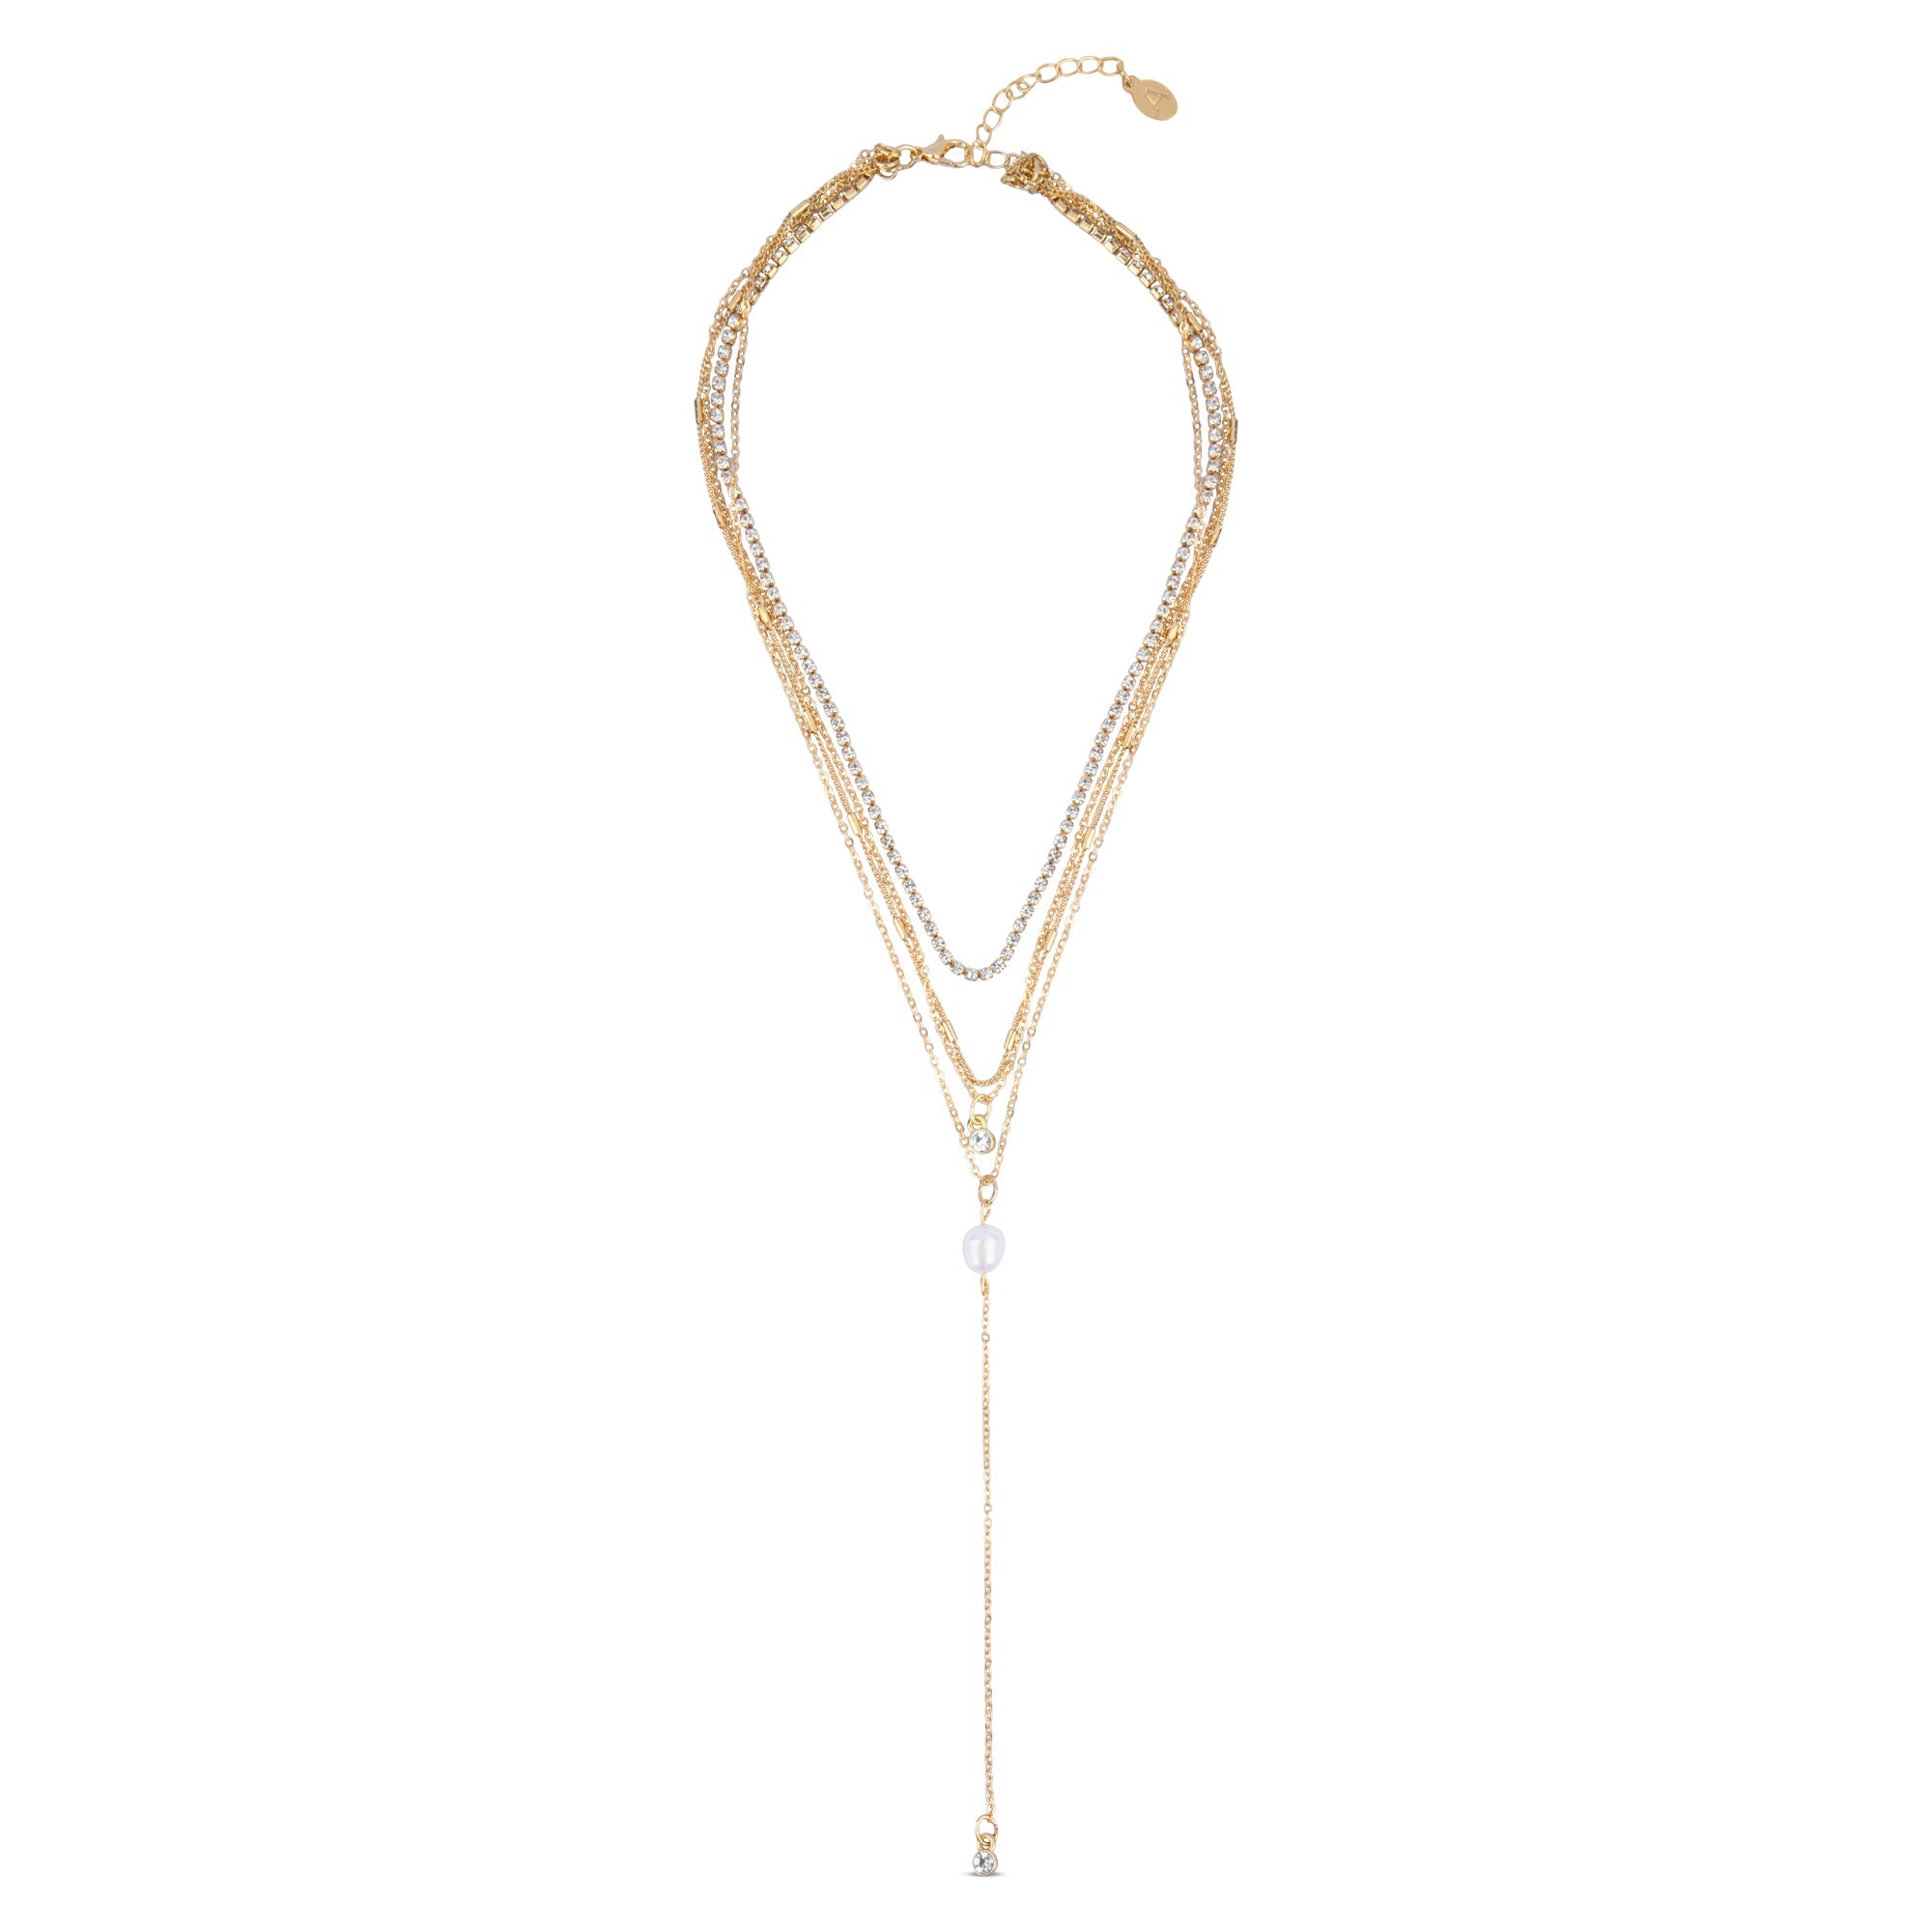 Buy Simple Discs Layered Necklace Online - Accessorize India